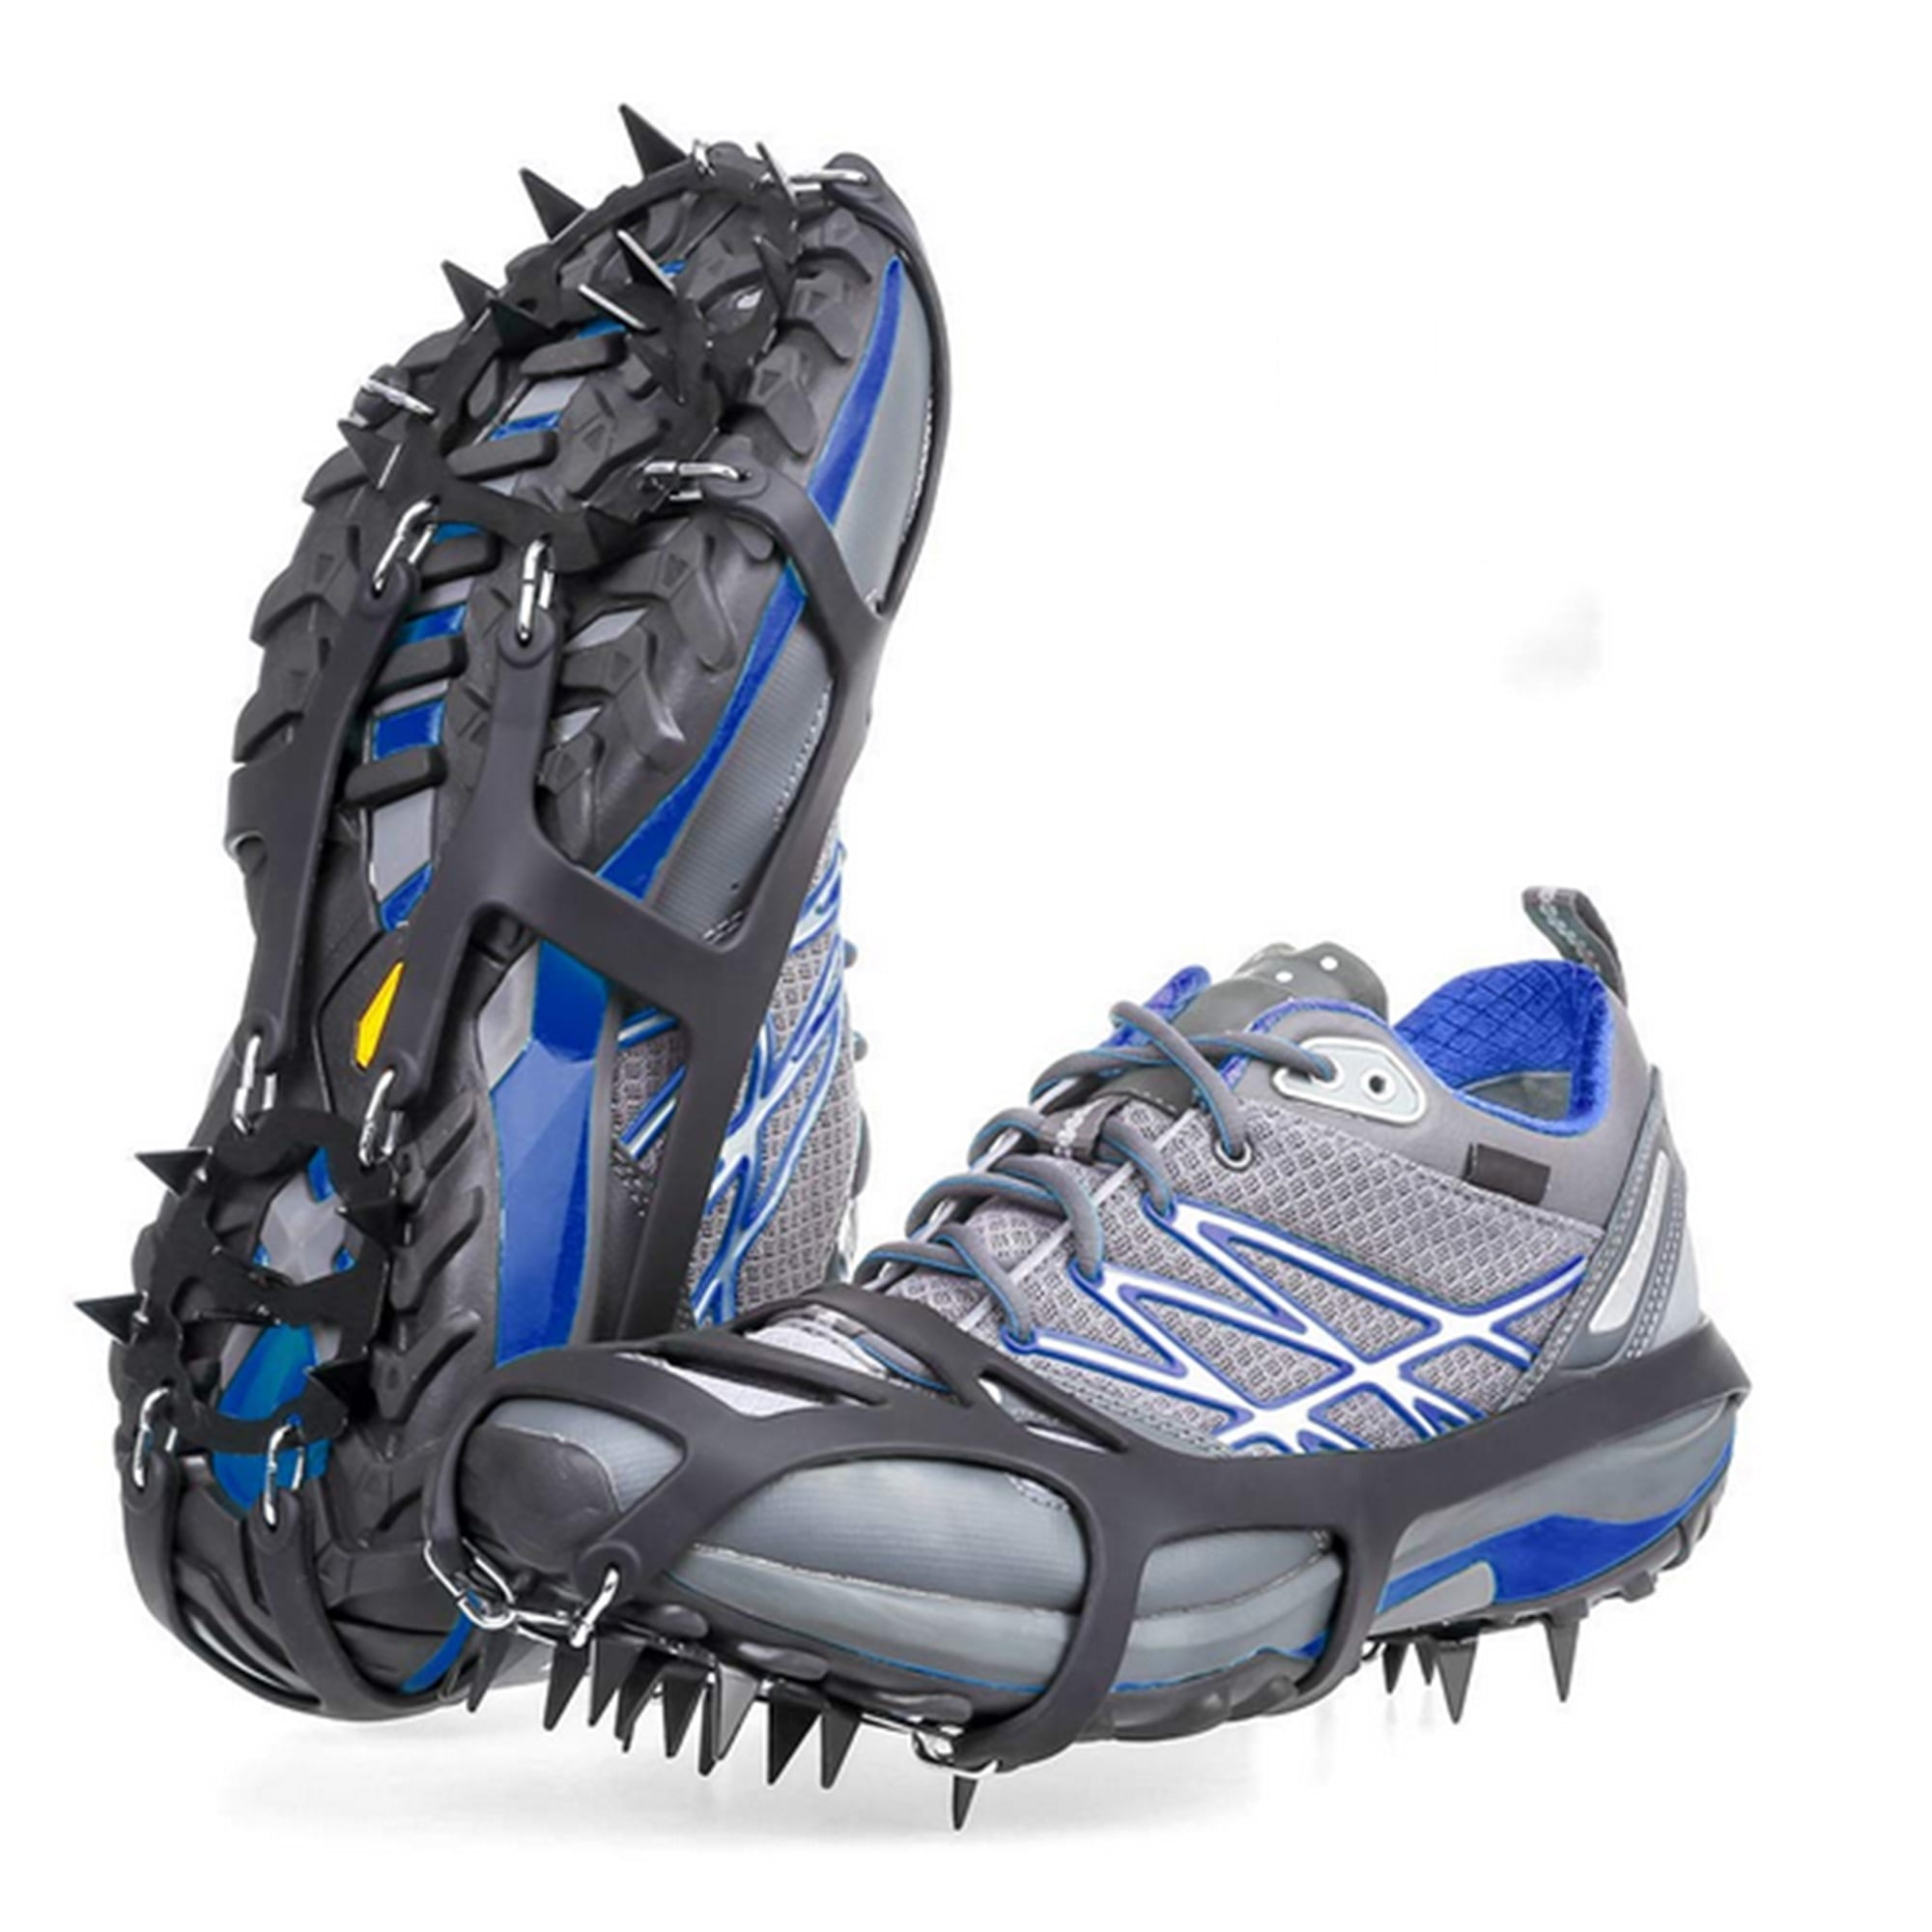 Ice Fishing LOPOO Crampons Traction Cleats Ice Snow Grips with 19 Spikes System Safe Protect for Walking Climbing and Hiking on Snow and Ice